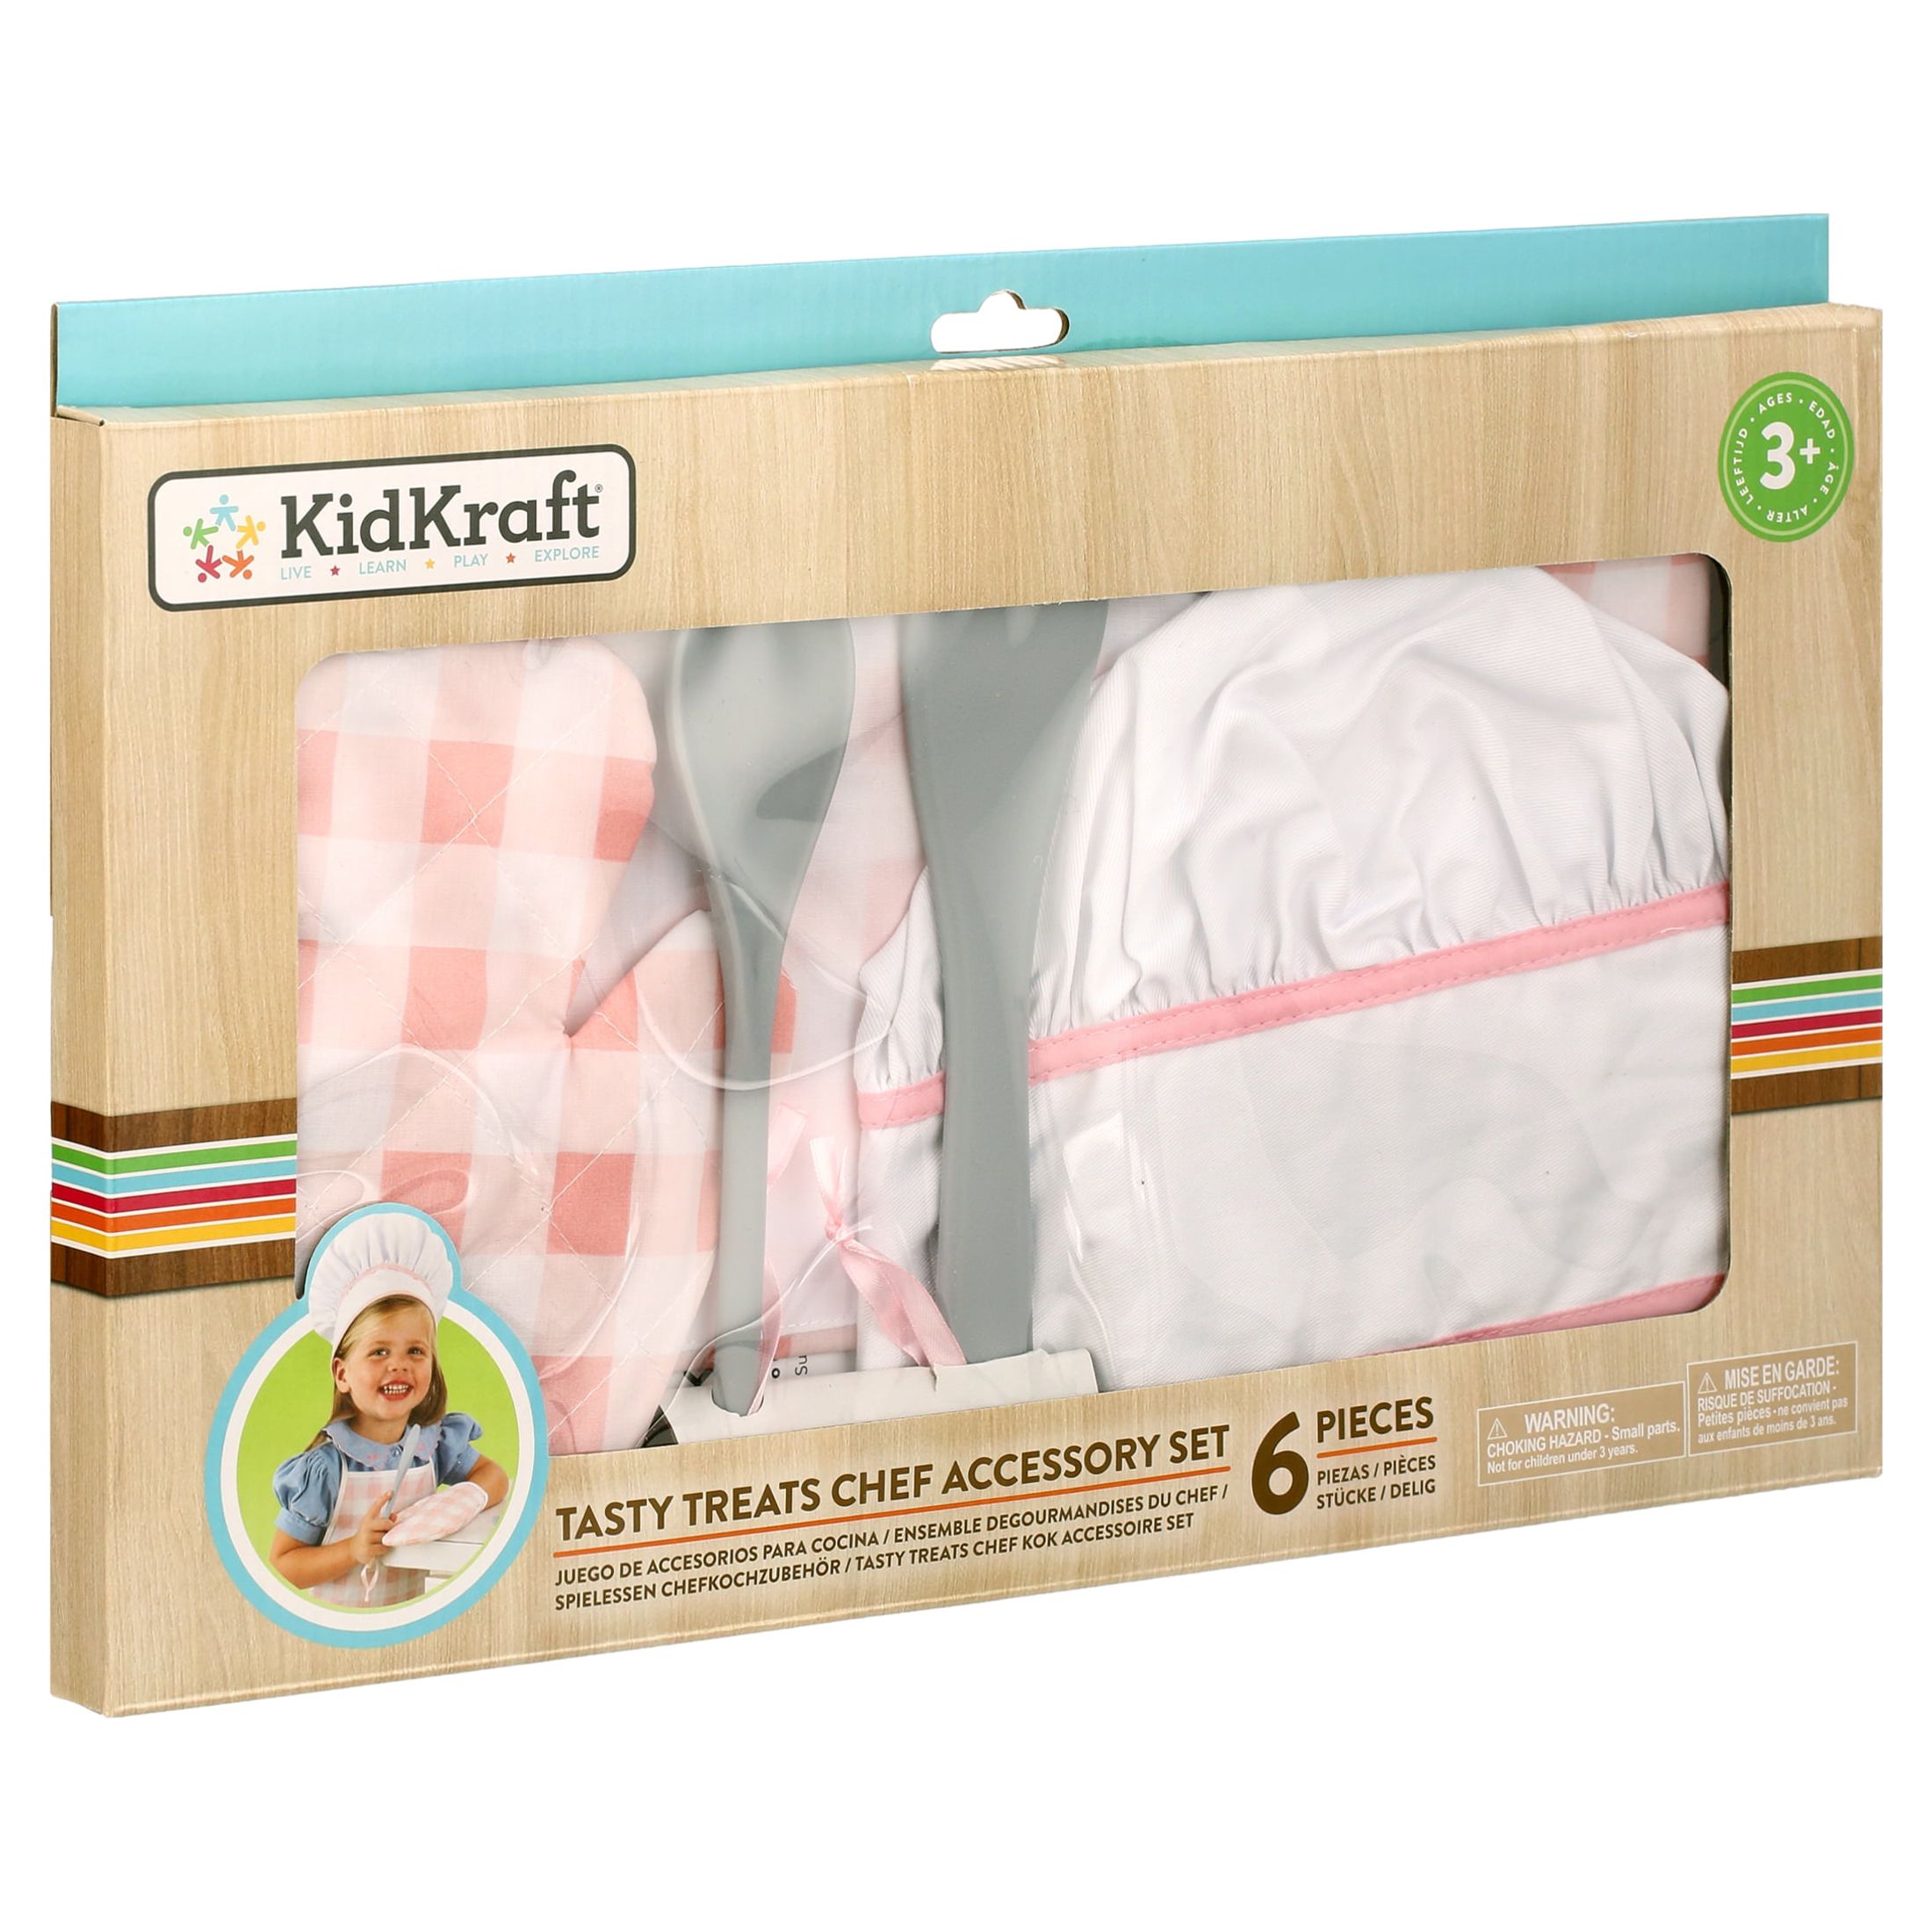 KidKraft Tasty Treats Chef Apron, Hat and Accessory Set for Kids, Pink - image 7 of 8